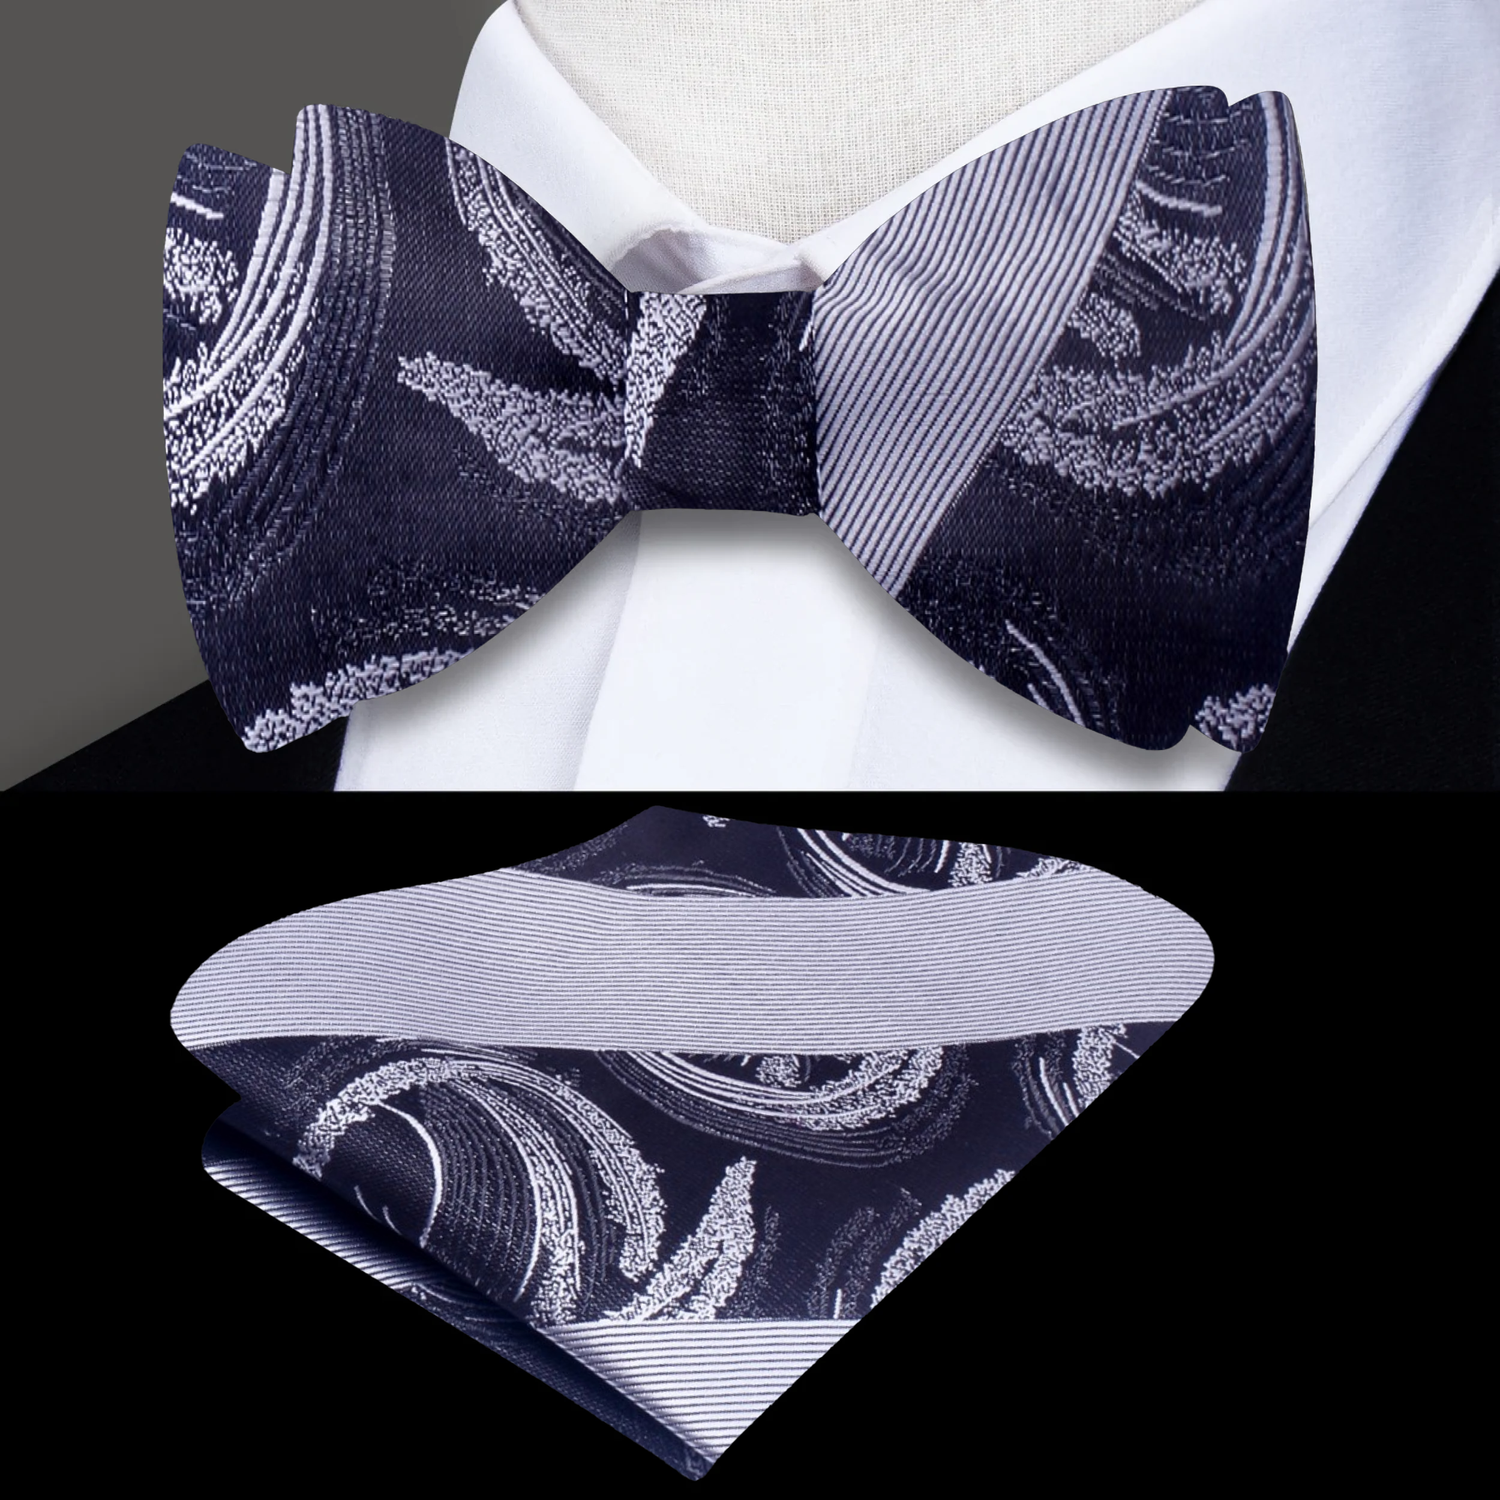 Grey Abstract Swirl with Thick Stripe Pattern Silk Self Tie Bow Tie, Matching Pocket Square